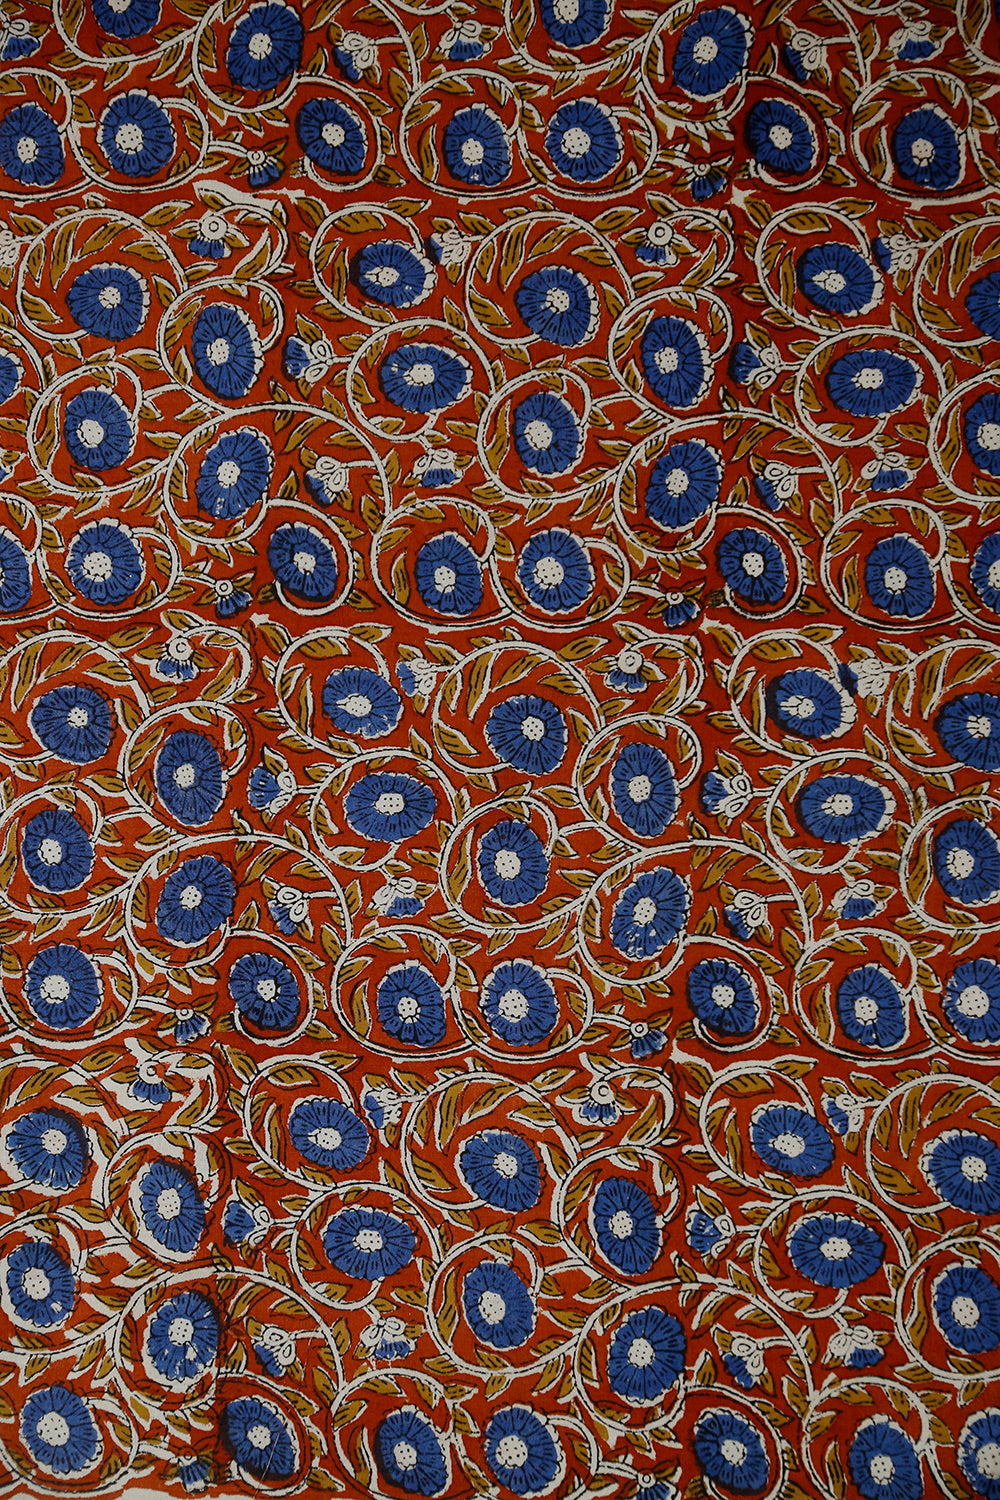 Blue Floral on Maroon Block Printed Cotton Fabric - 1.1m